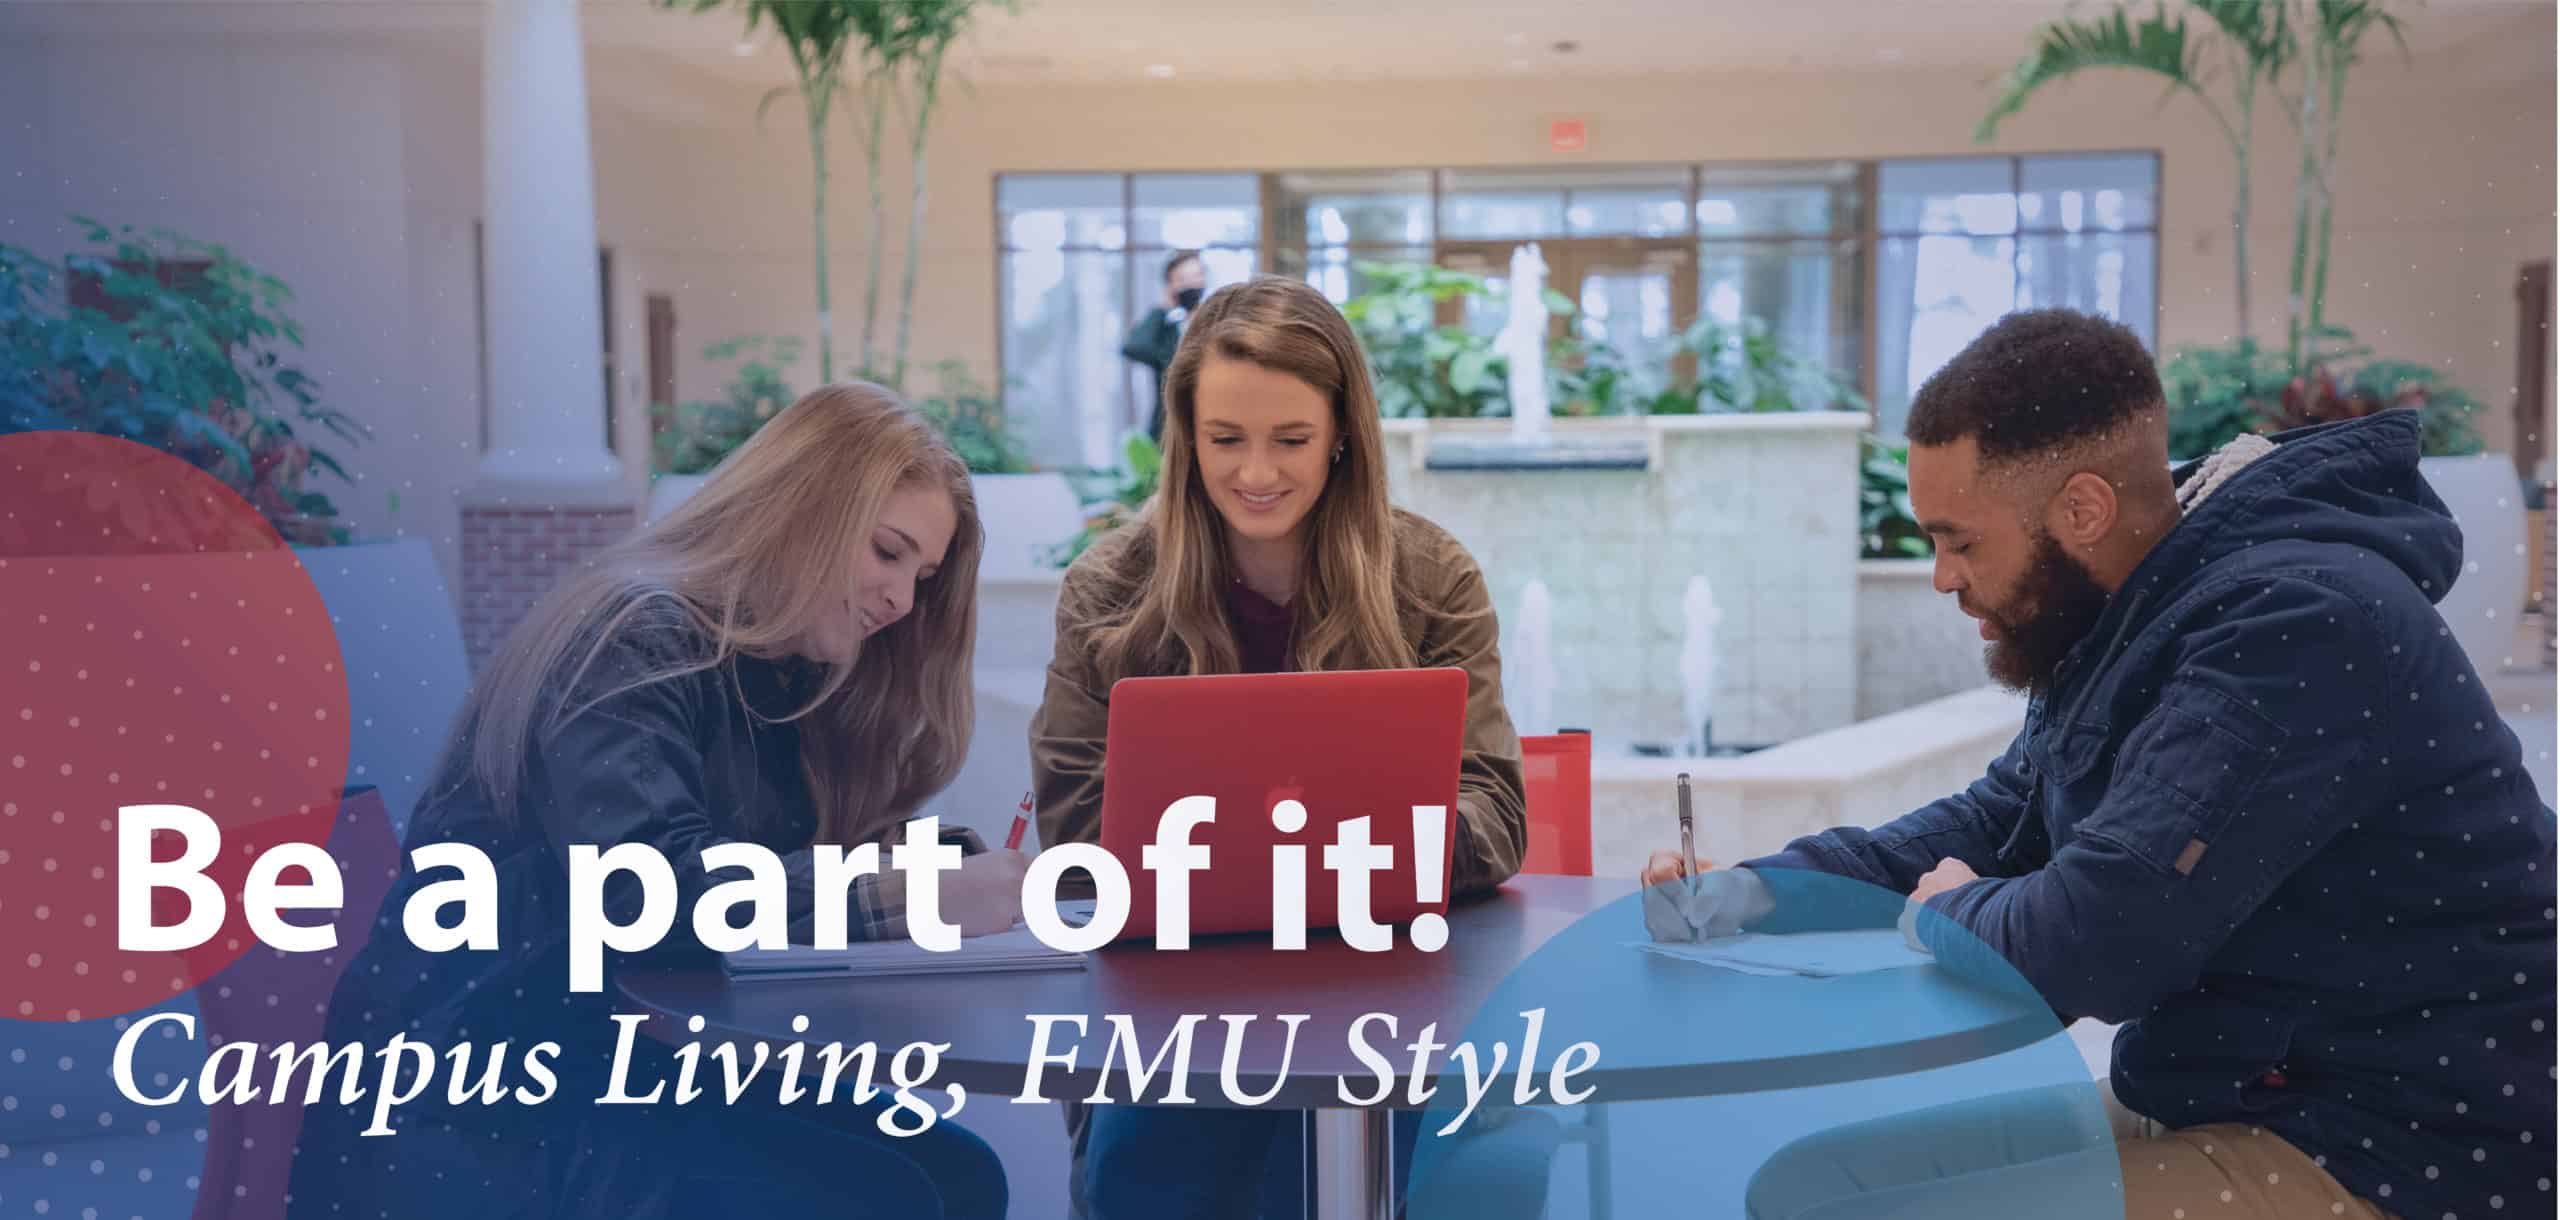 Students study in the Honors Center with the text, "Be a part of it! Campus living, FMU style."